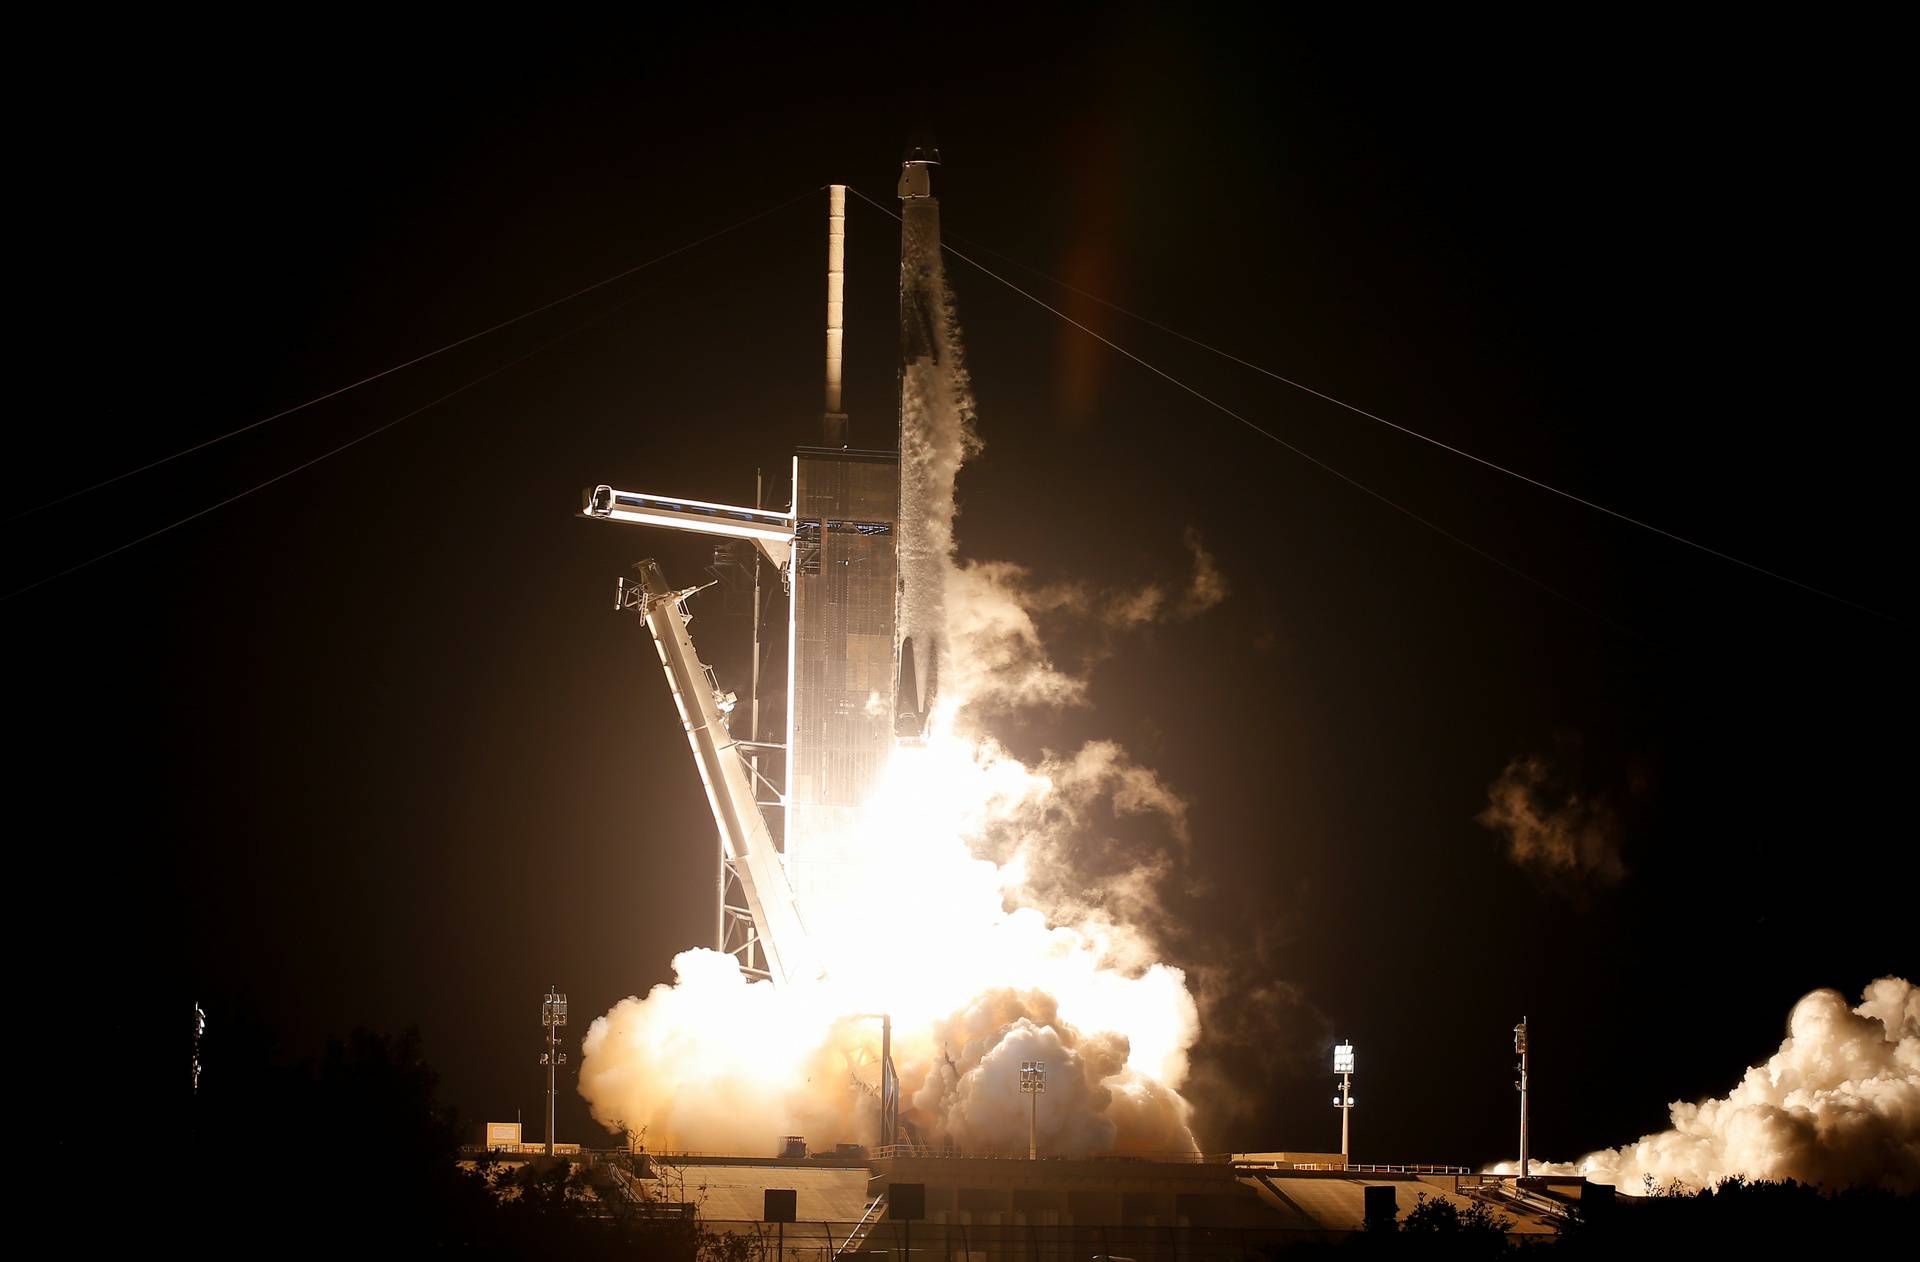 A SpaceX Falcon 9 rocket, topped with the Crew Dragon capsule, is launched carrying four astronauts on the first operational NASA commercial crew mission at Kennedy Space Center in Cape Canaveral, Florida